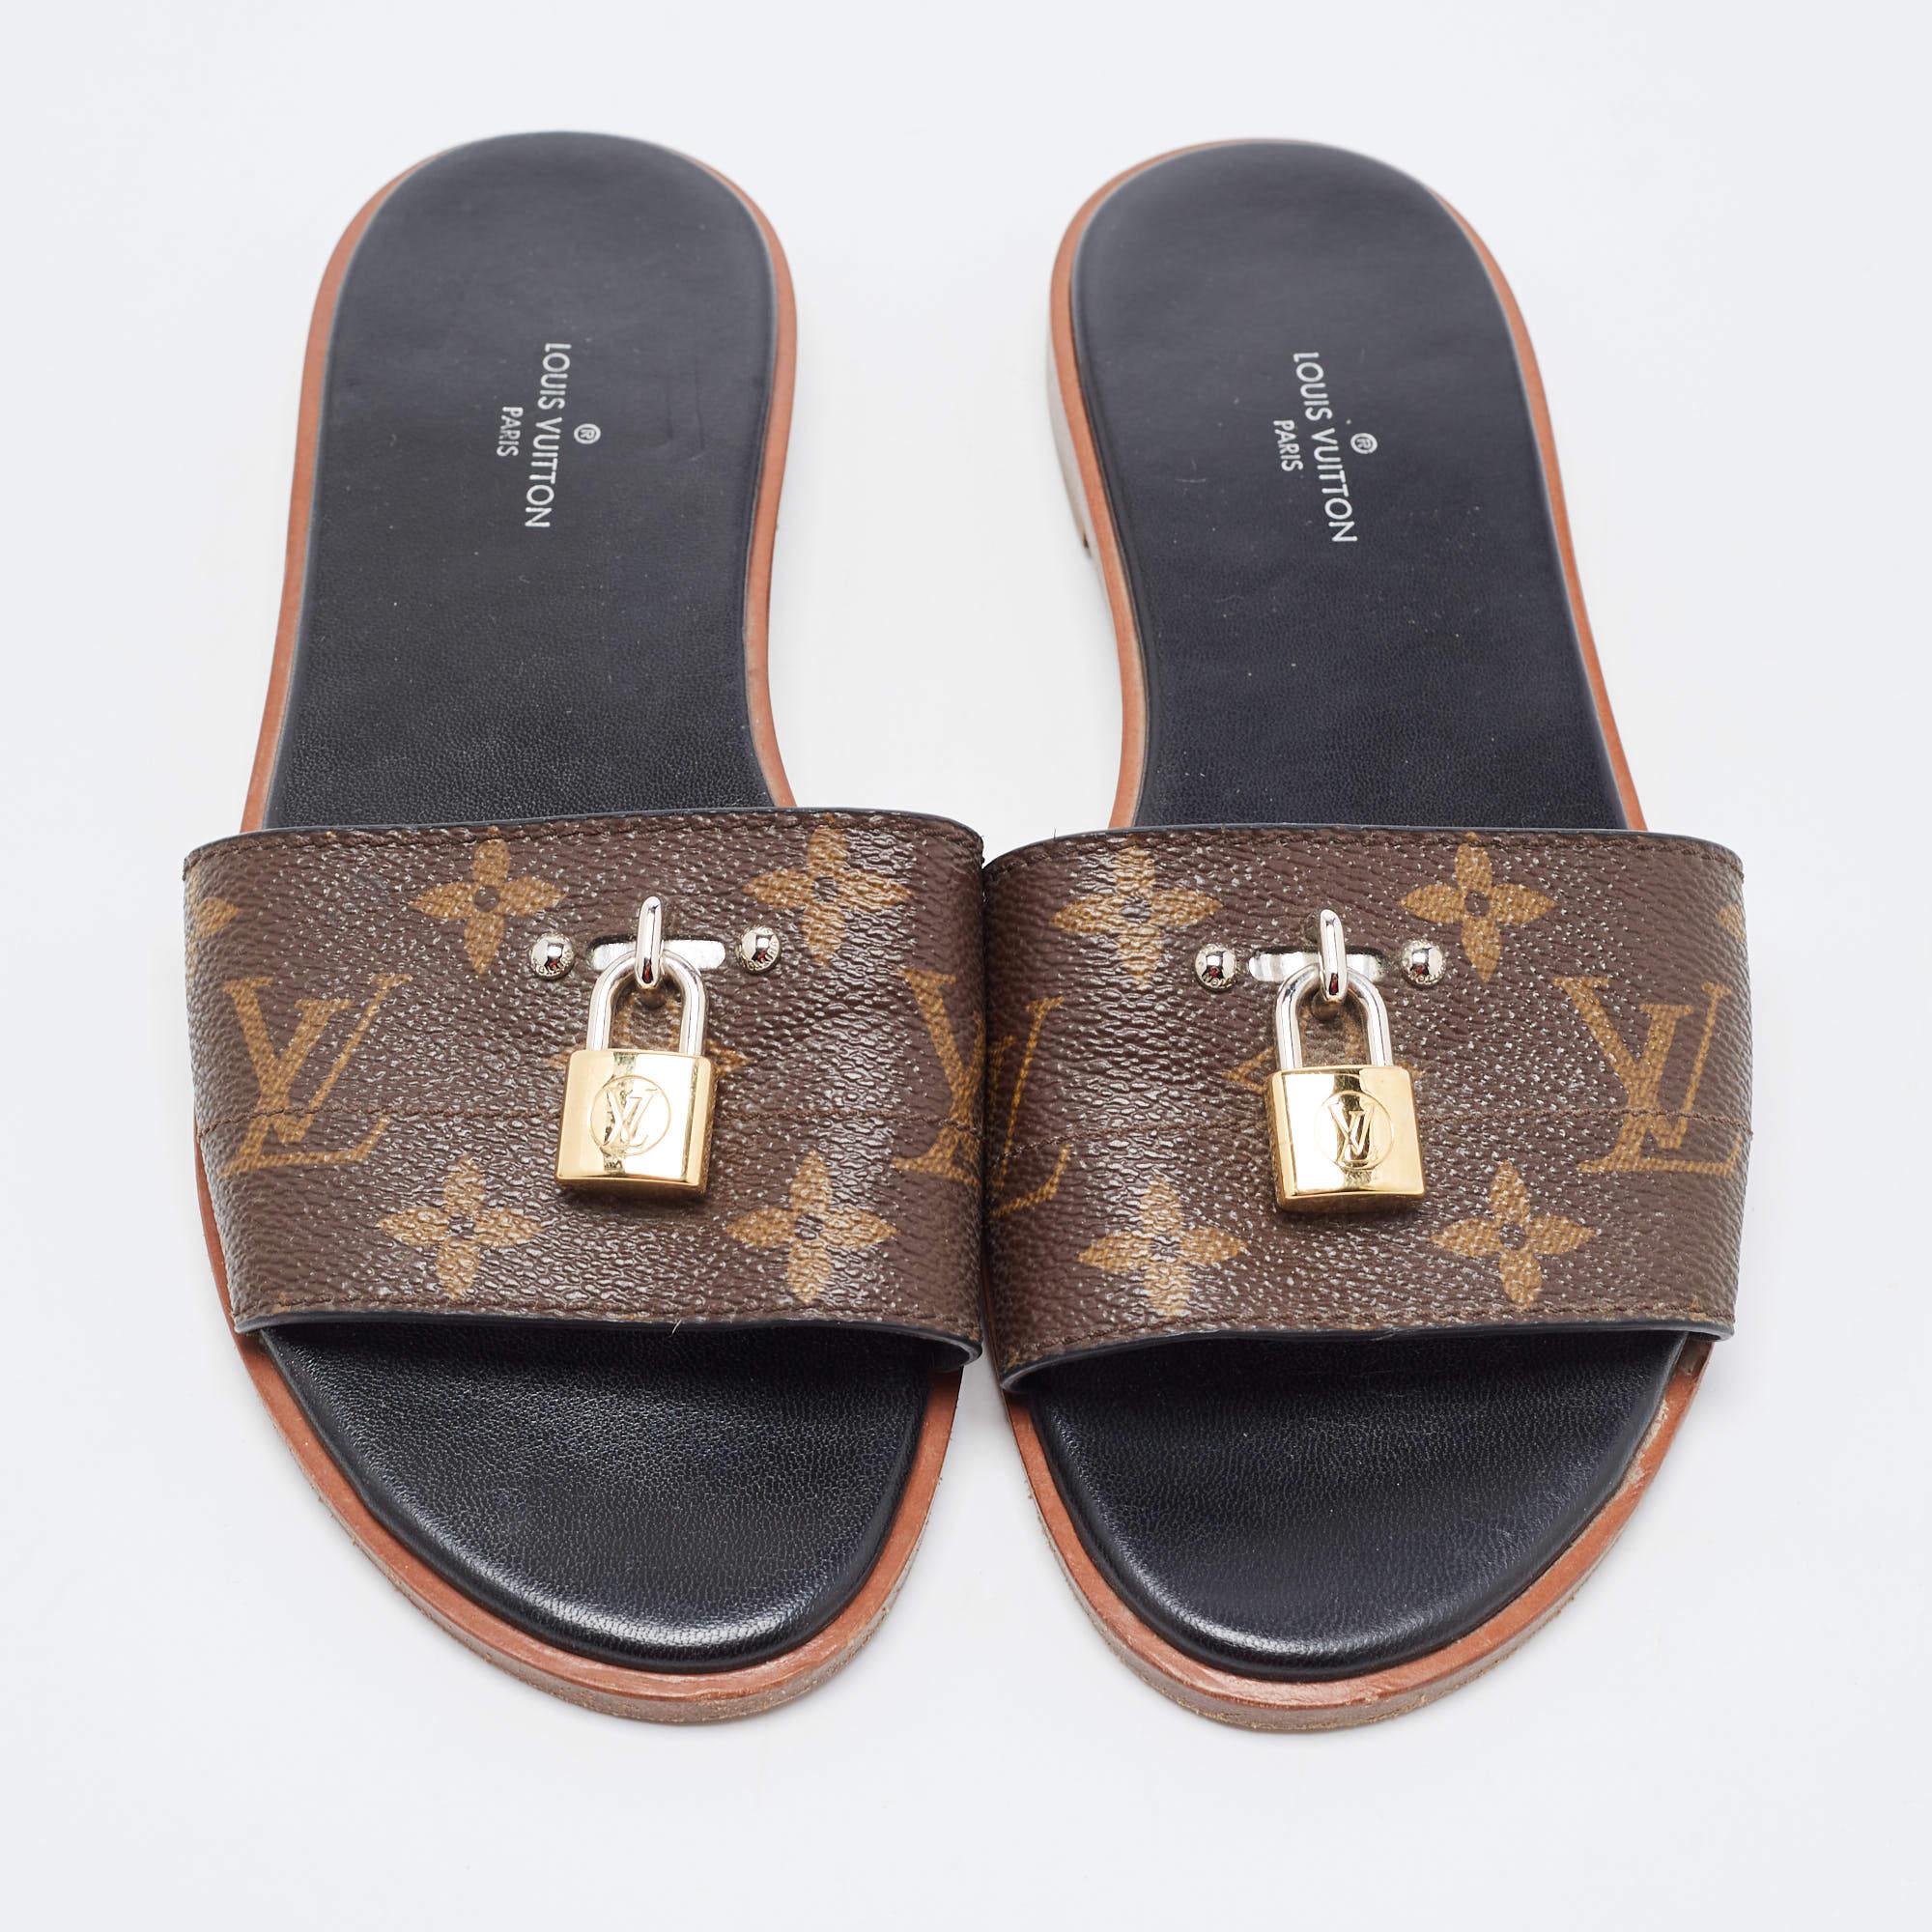 Create effortless styles with these LV flat slides. Made of quality materials, they are designed to elevate your OOTD and keep you in comfort all day long.

